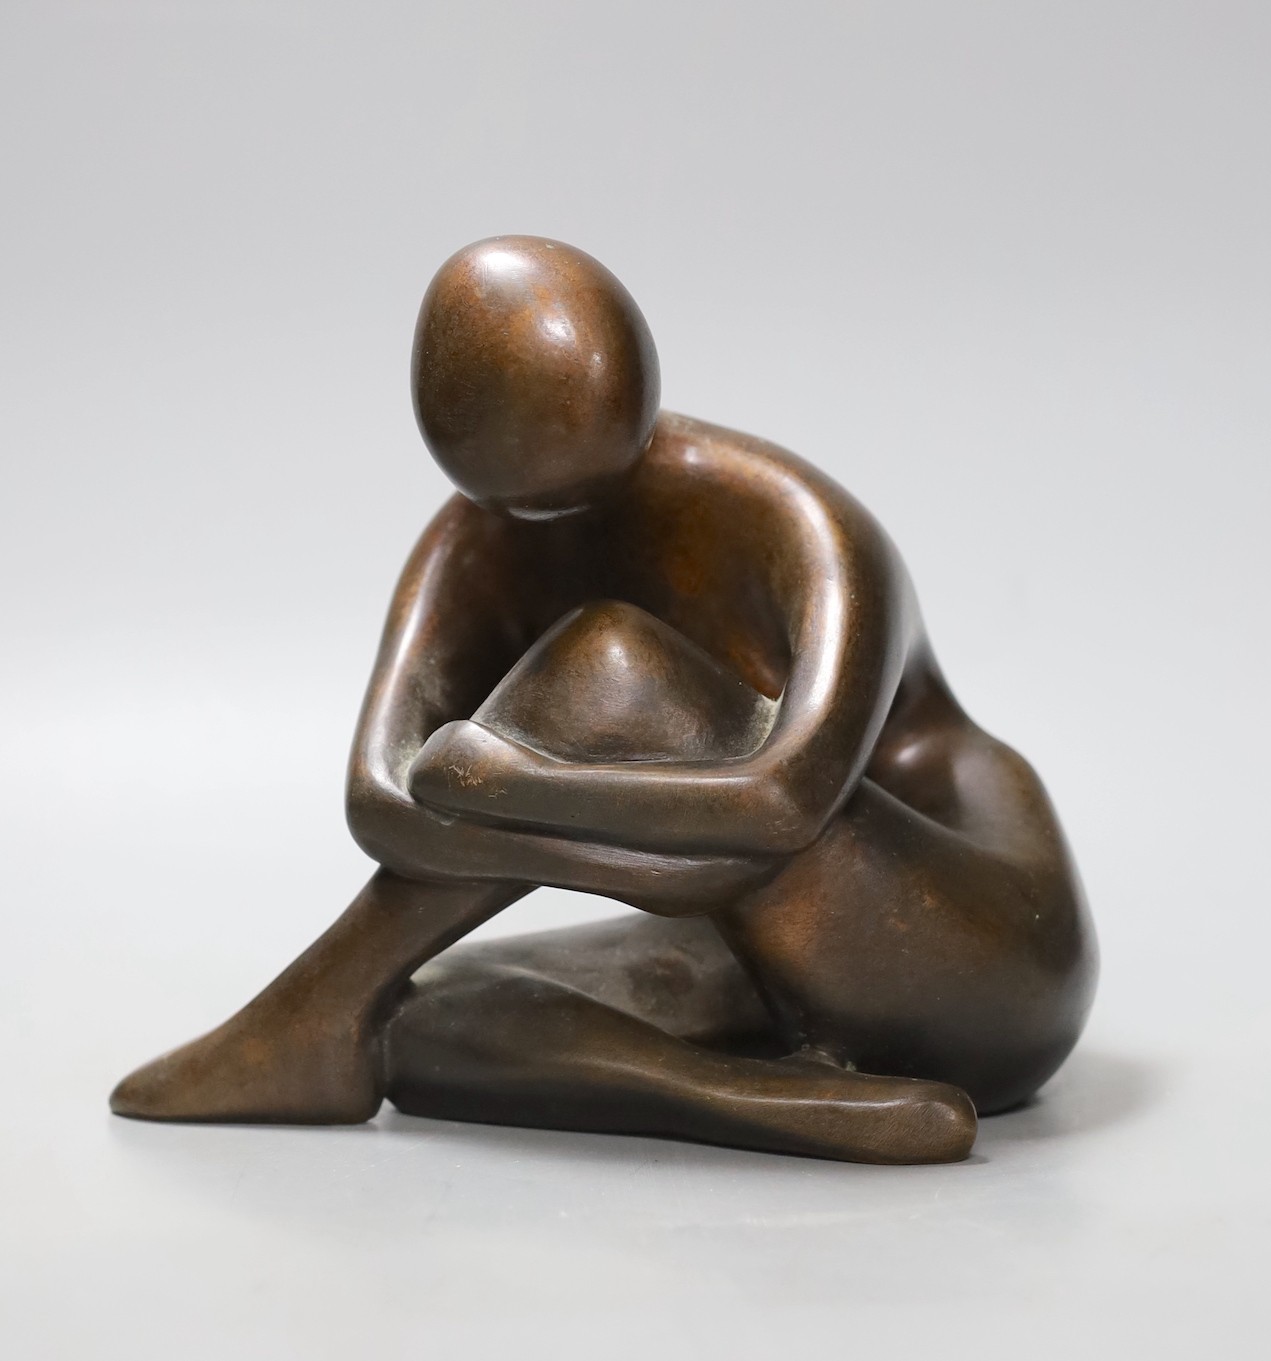 Leslie John Summers, A bronze abstract seated figure, 17.5cm tall